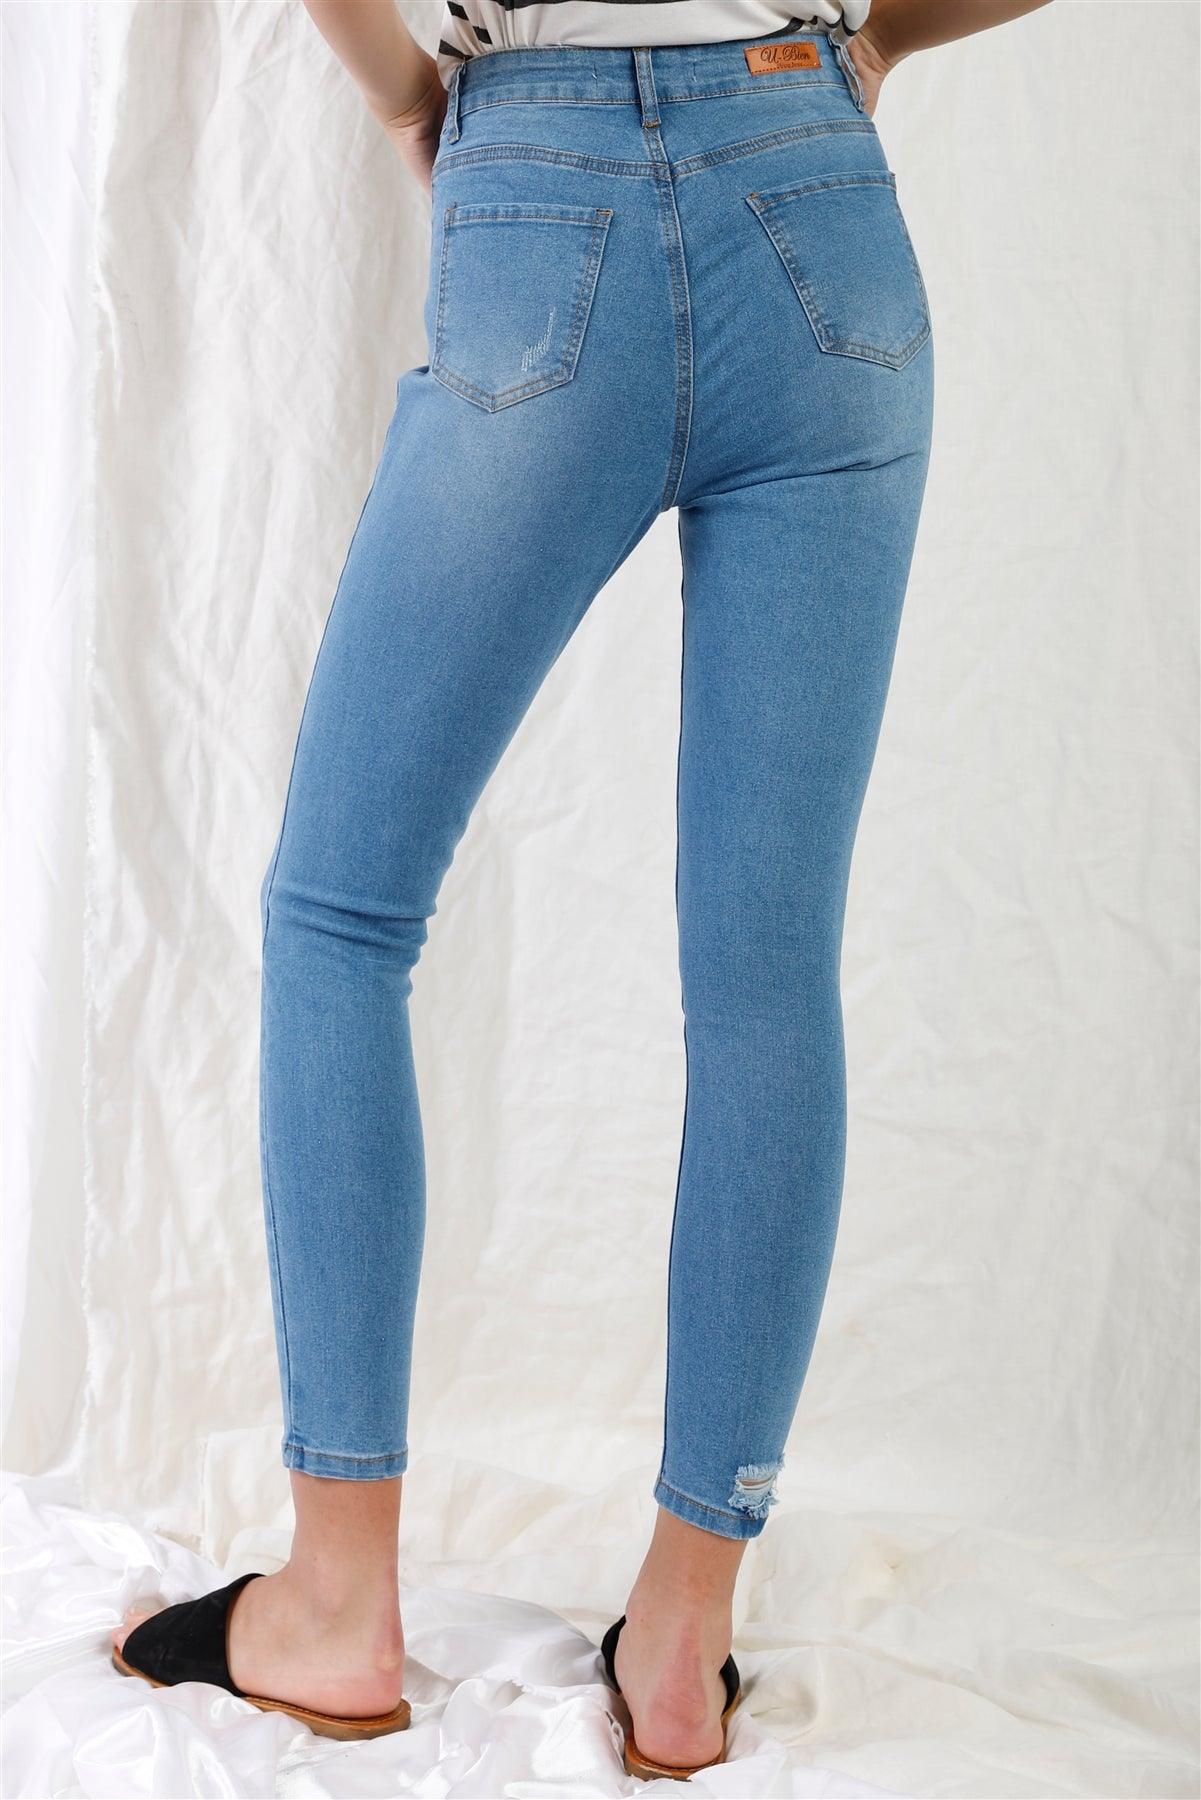 Light Blue High-Waisted With Rips Skinny Denim Jeans /1-1-3-3-2-1-1